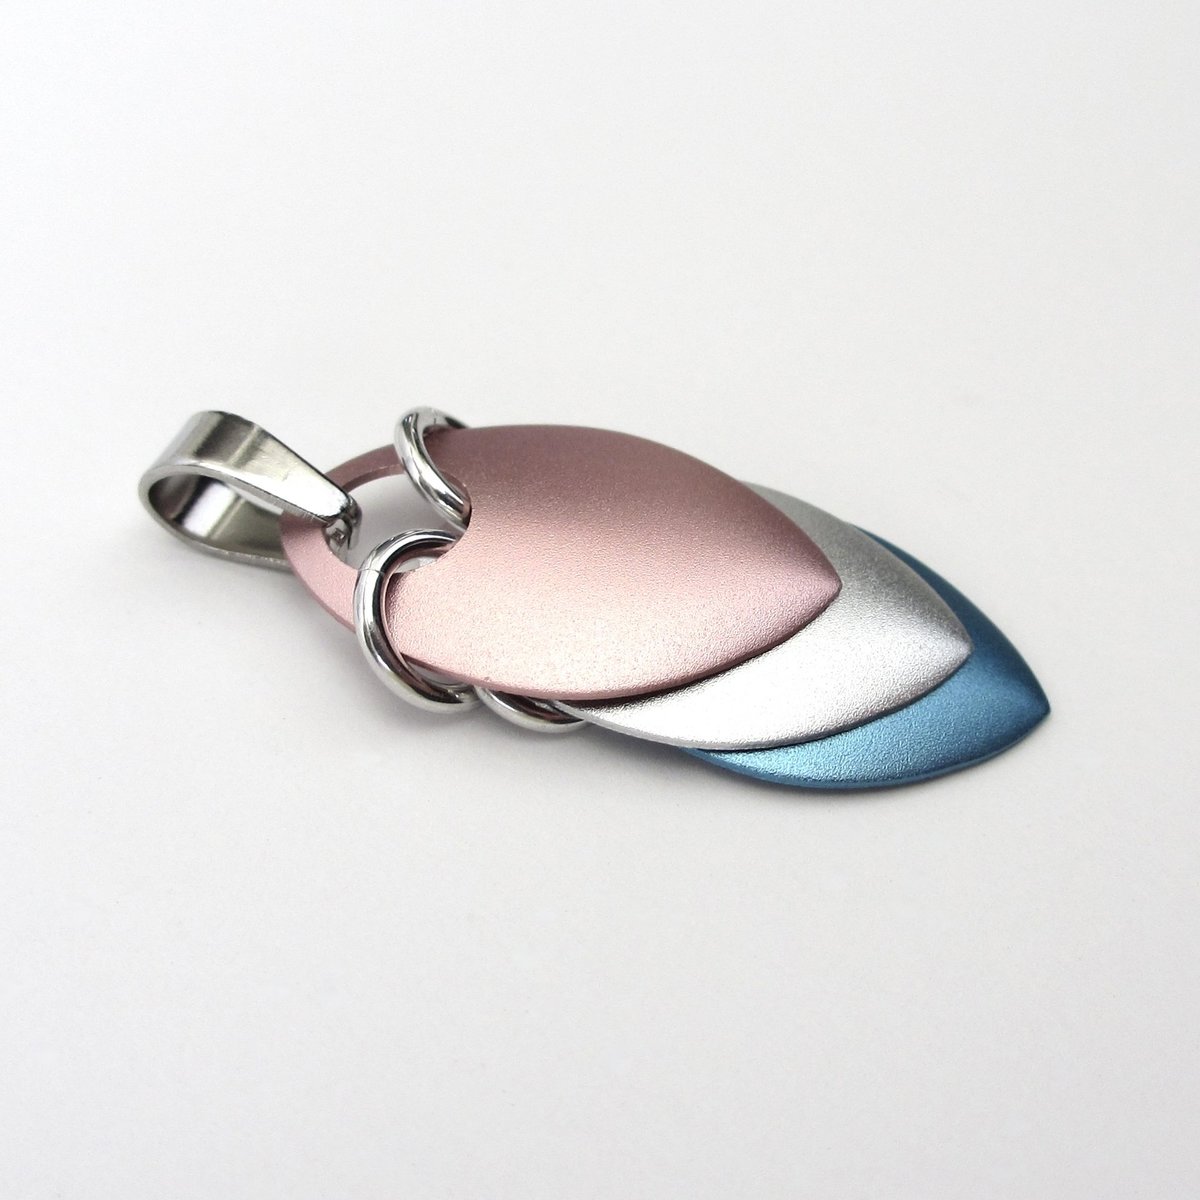 Transgender pride pendant necklace, chainmail scale pendant, trans pride jewelry, pink, white, light blue